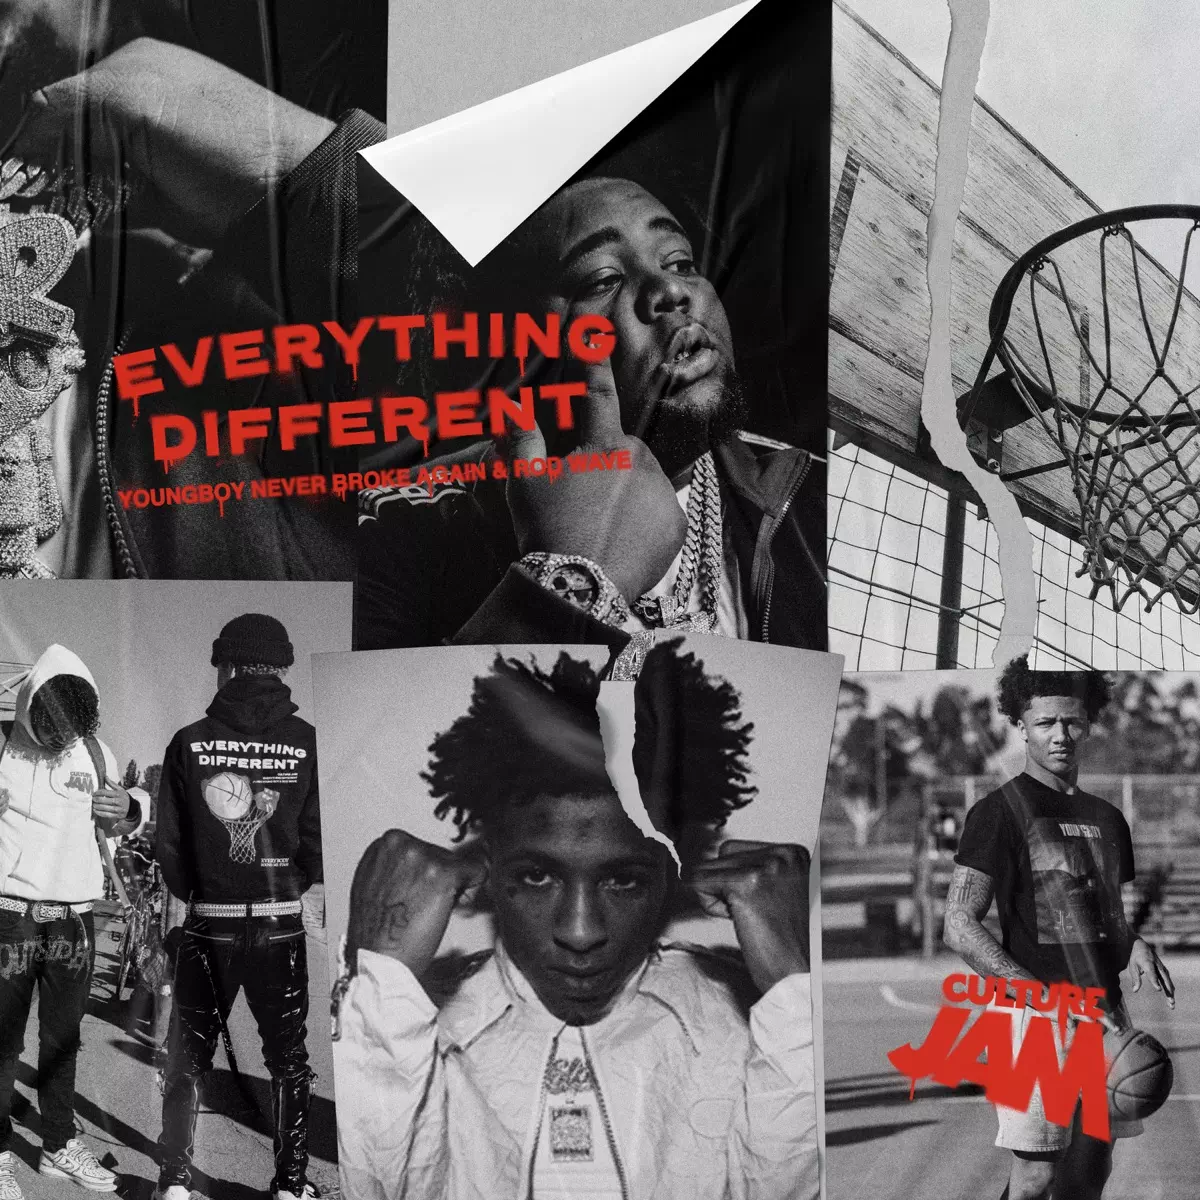 Everything Different - Single by Culture Jam, YoungBoy Never Broke Again & Rod Wave on Apple Music